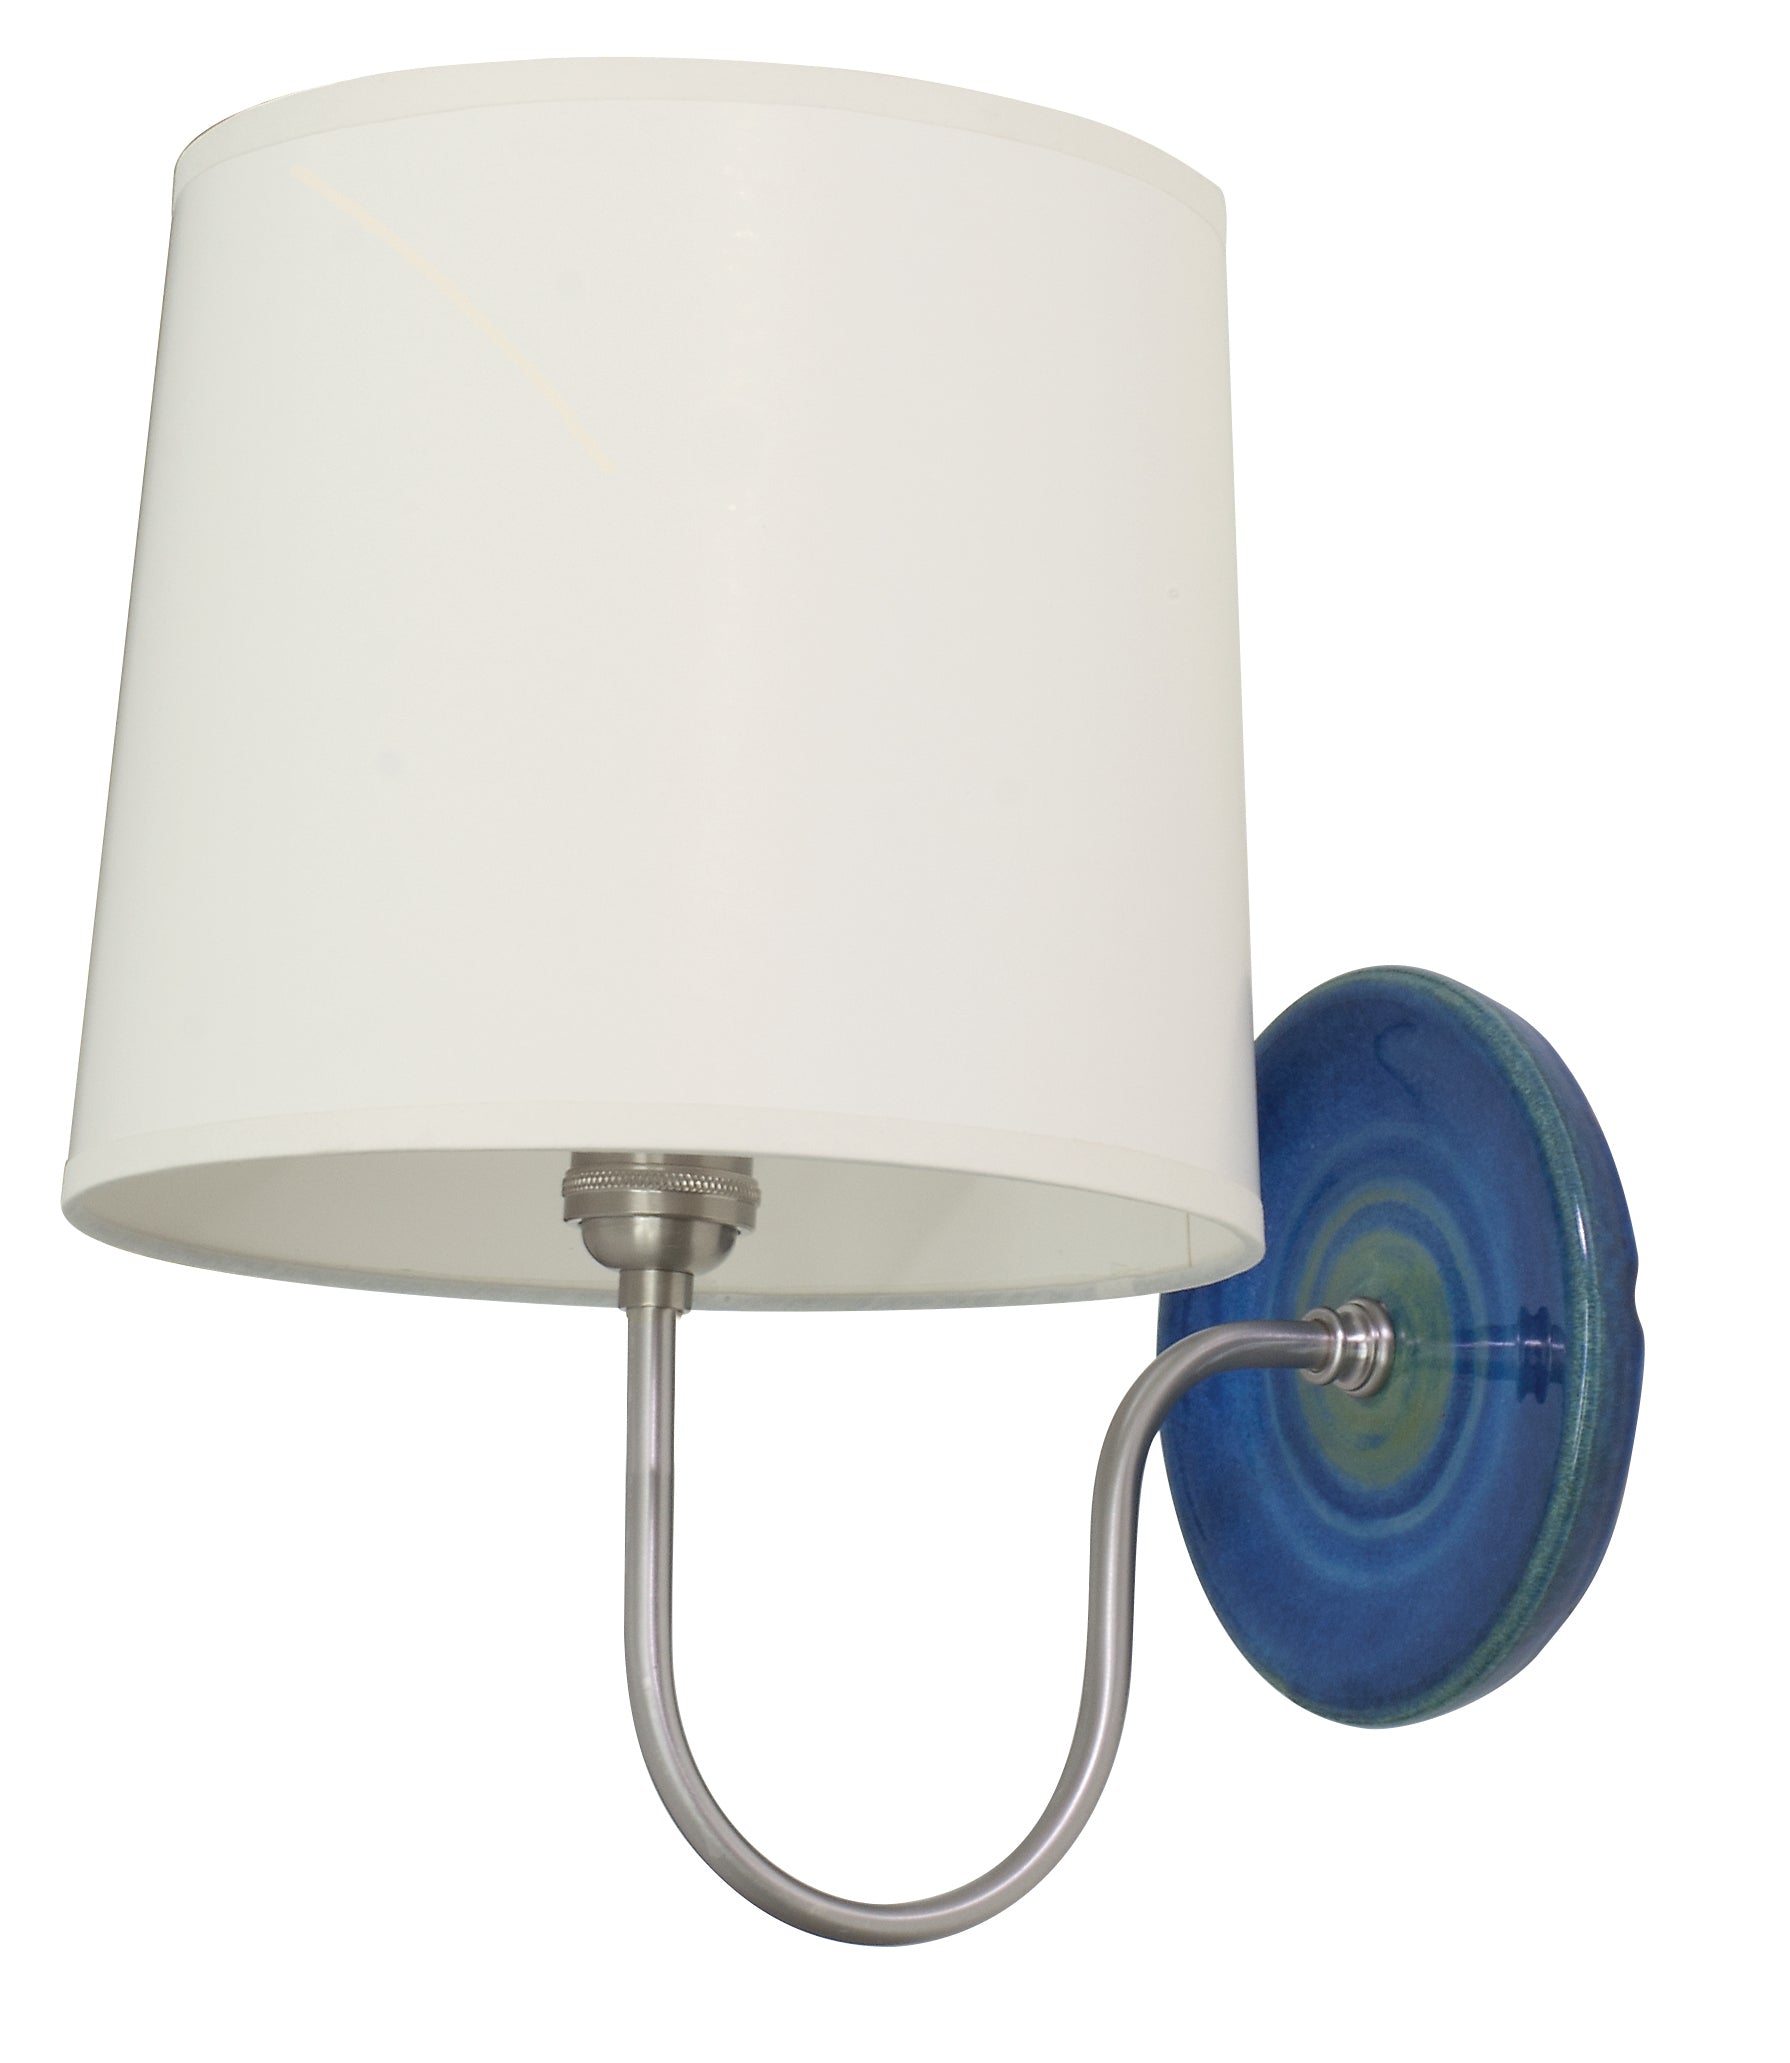 House of Troy Scatchard Wall Lamp in Blue Gloss GS725-BG